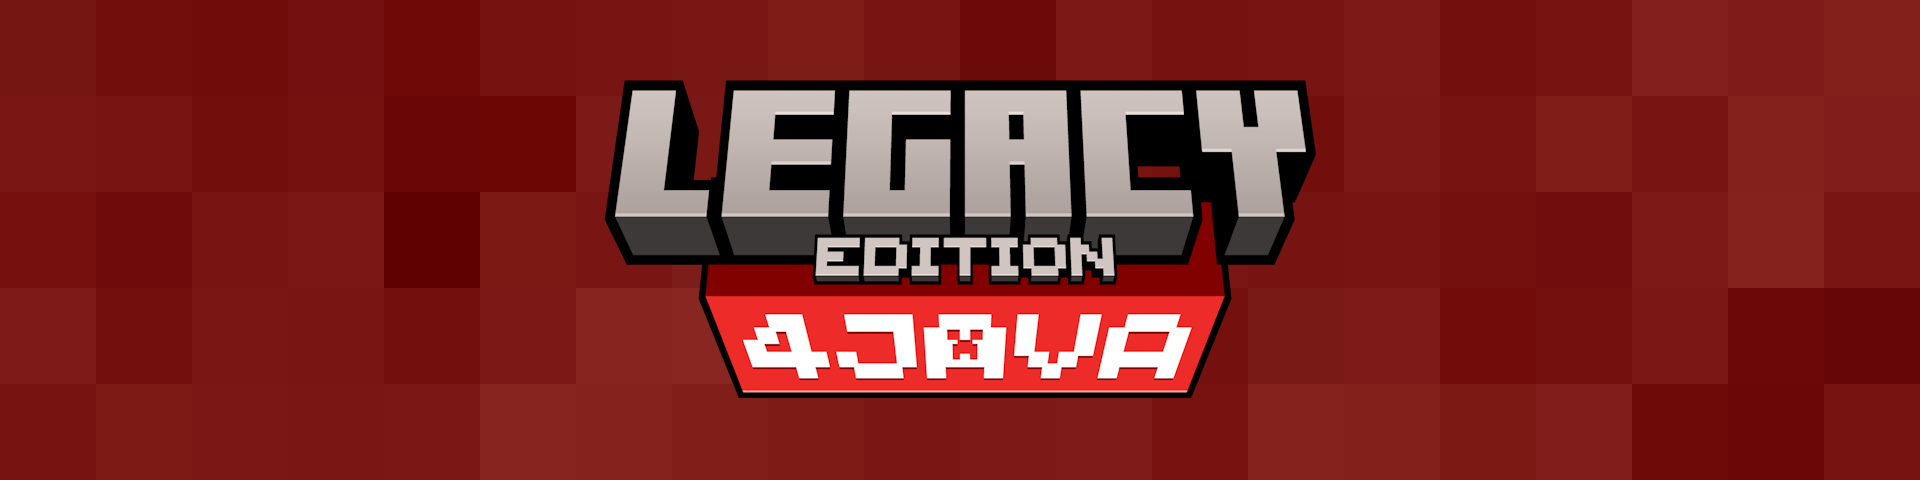 A title using Minecraft's logo style saying "Legacy Edition 4JAVA" in a red pixelated background